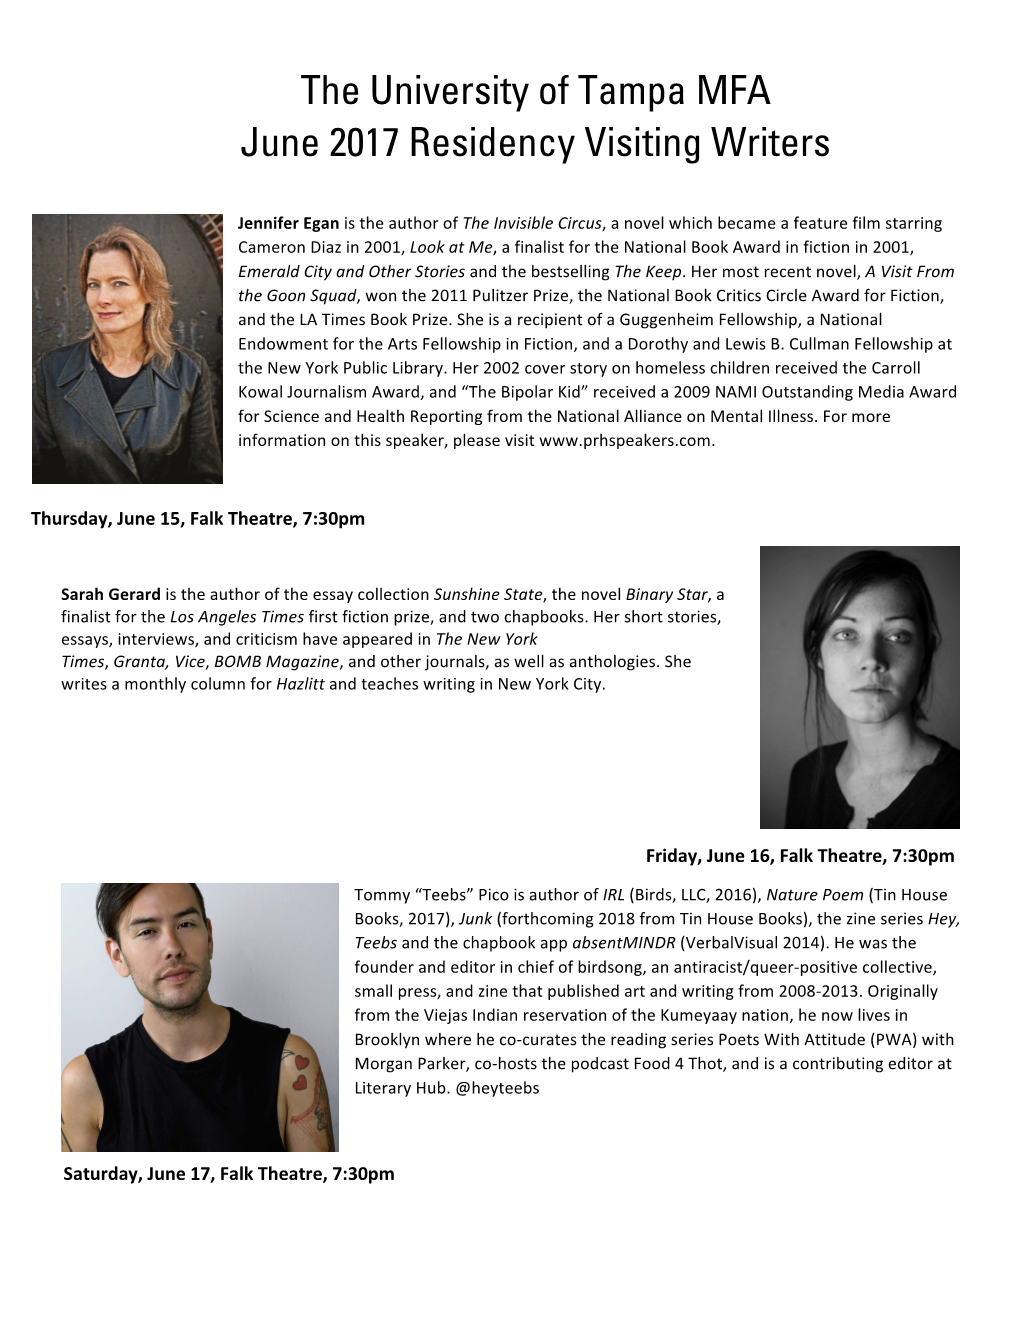 View June 2017 Lectores Reading Series (PDF)